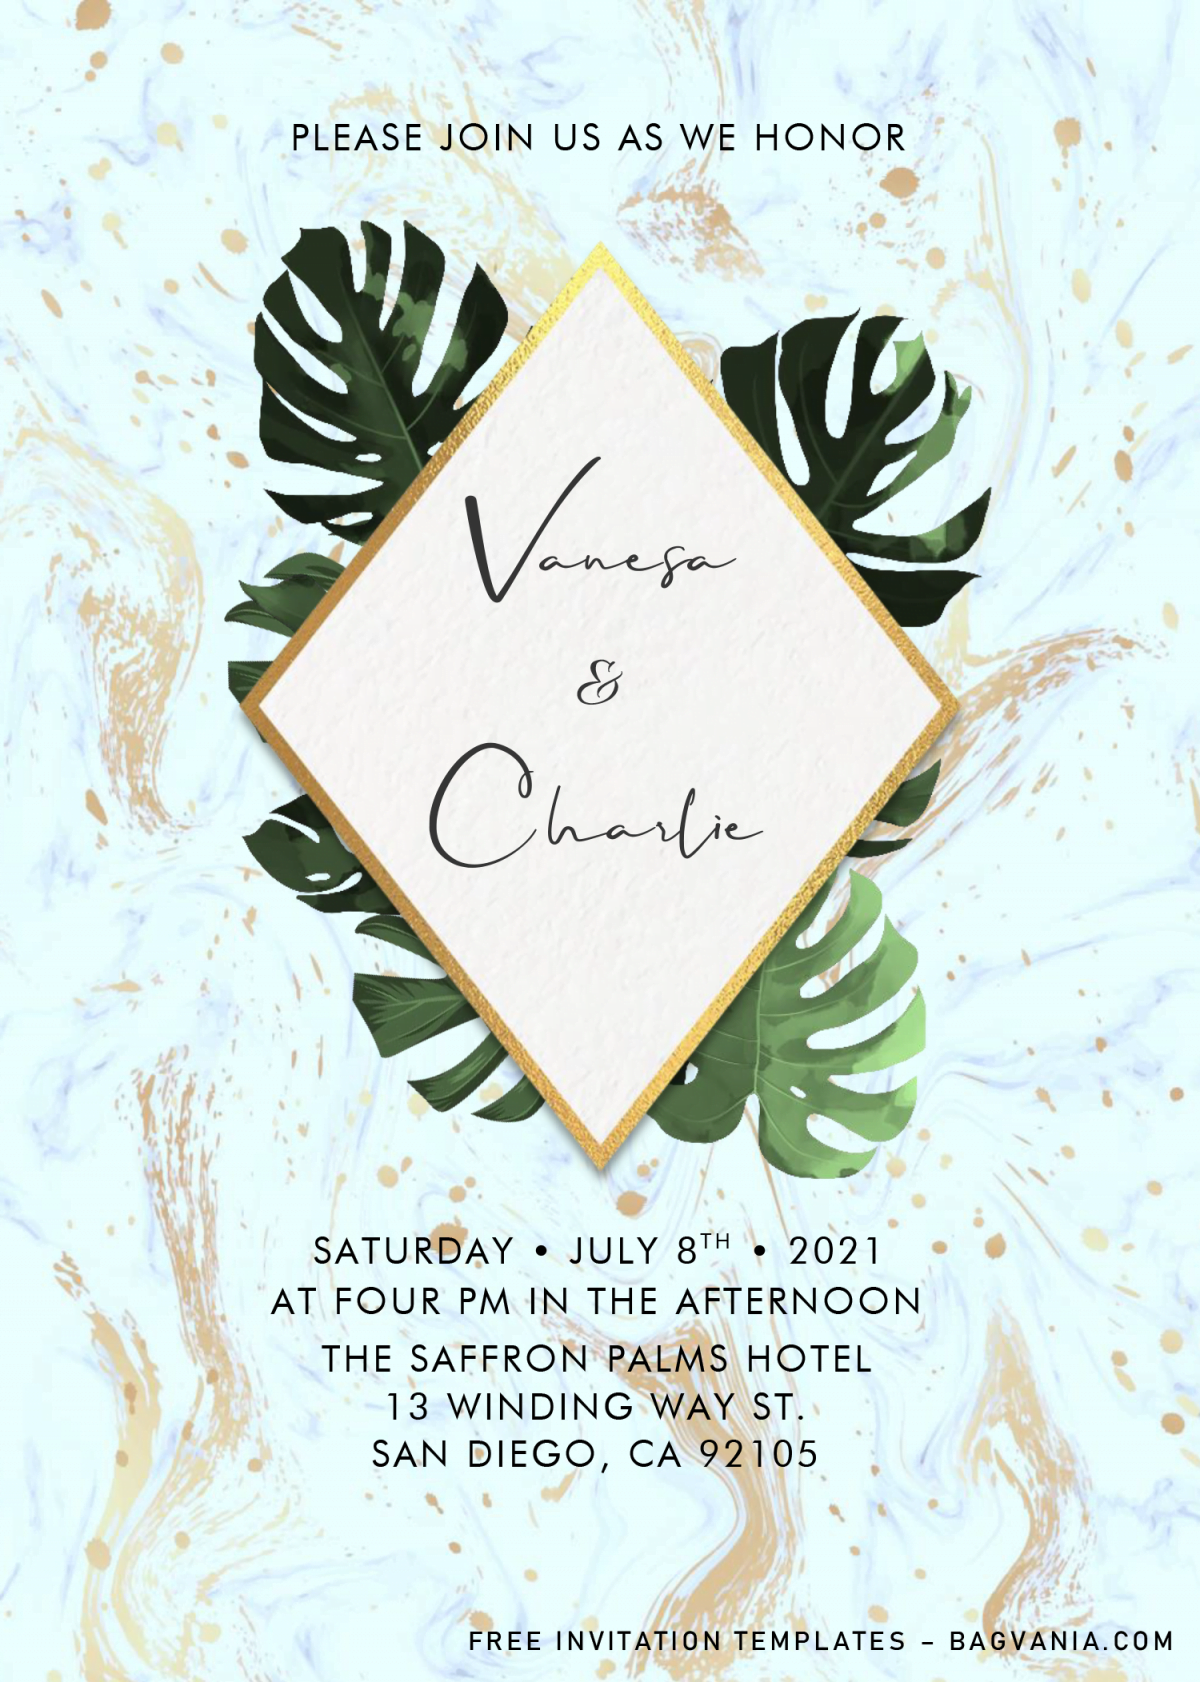 Classy Tropical Invitation Templates - Editable .Docx and has gold marble background